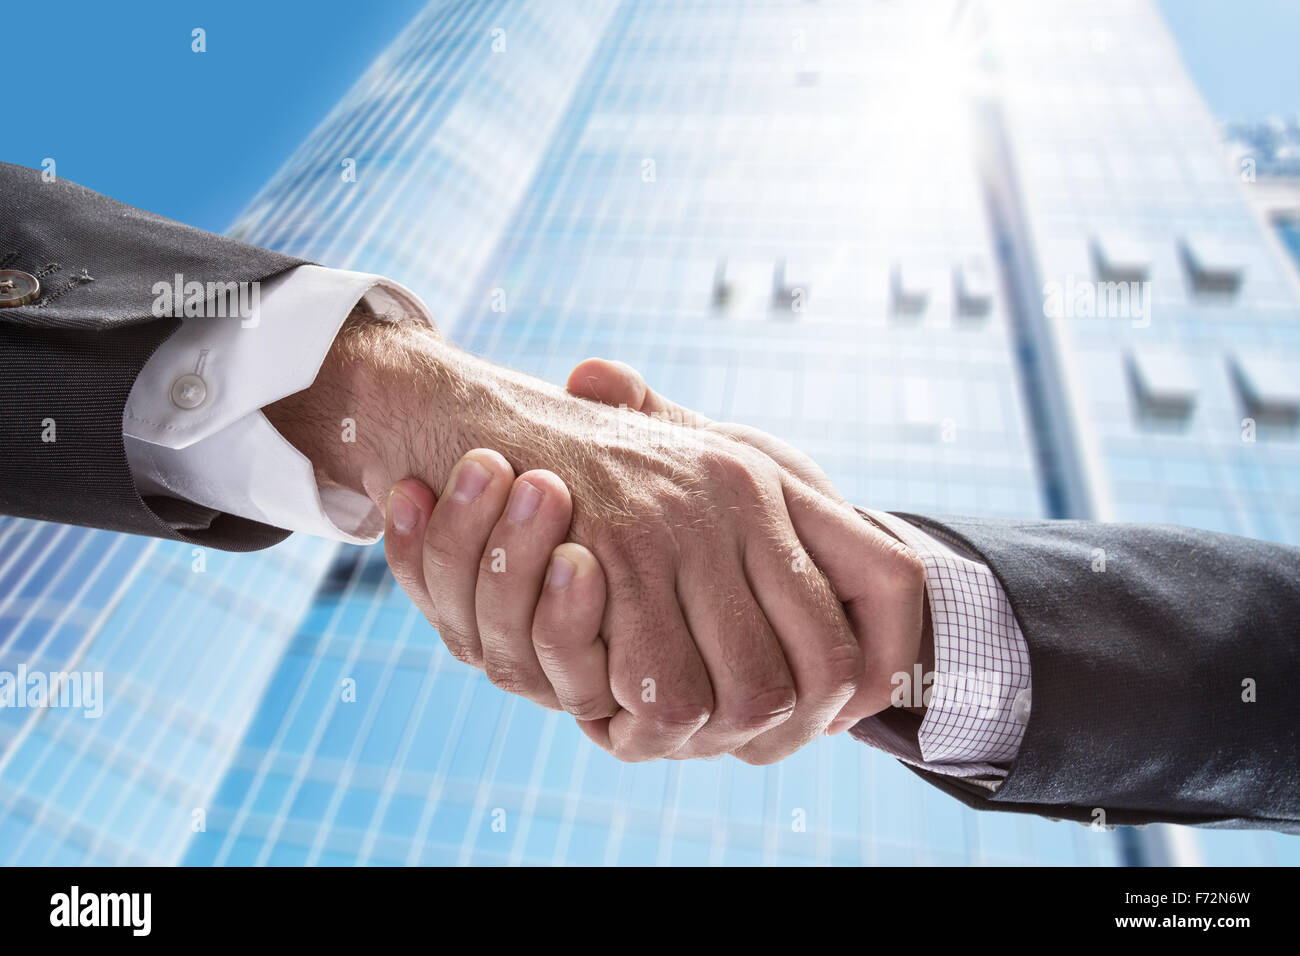 Handshake. Closeup shot of hands. The business center on the background. Stock Photo